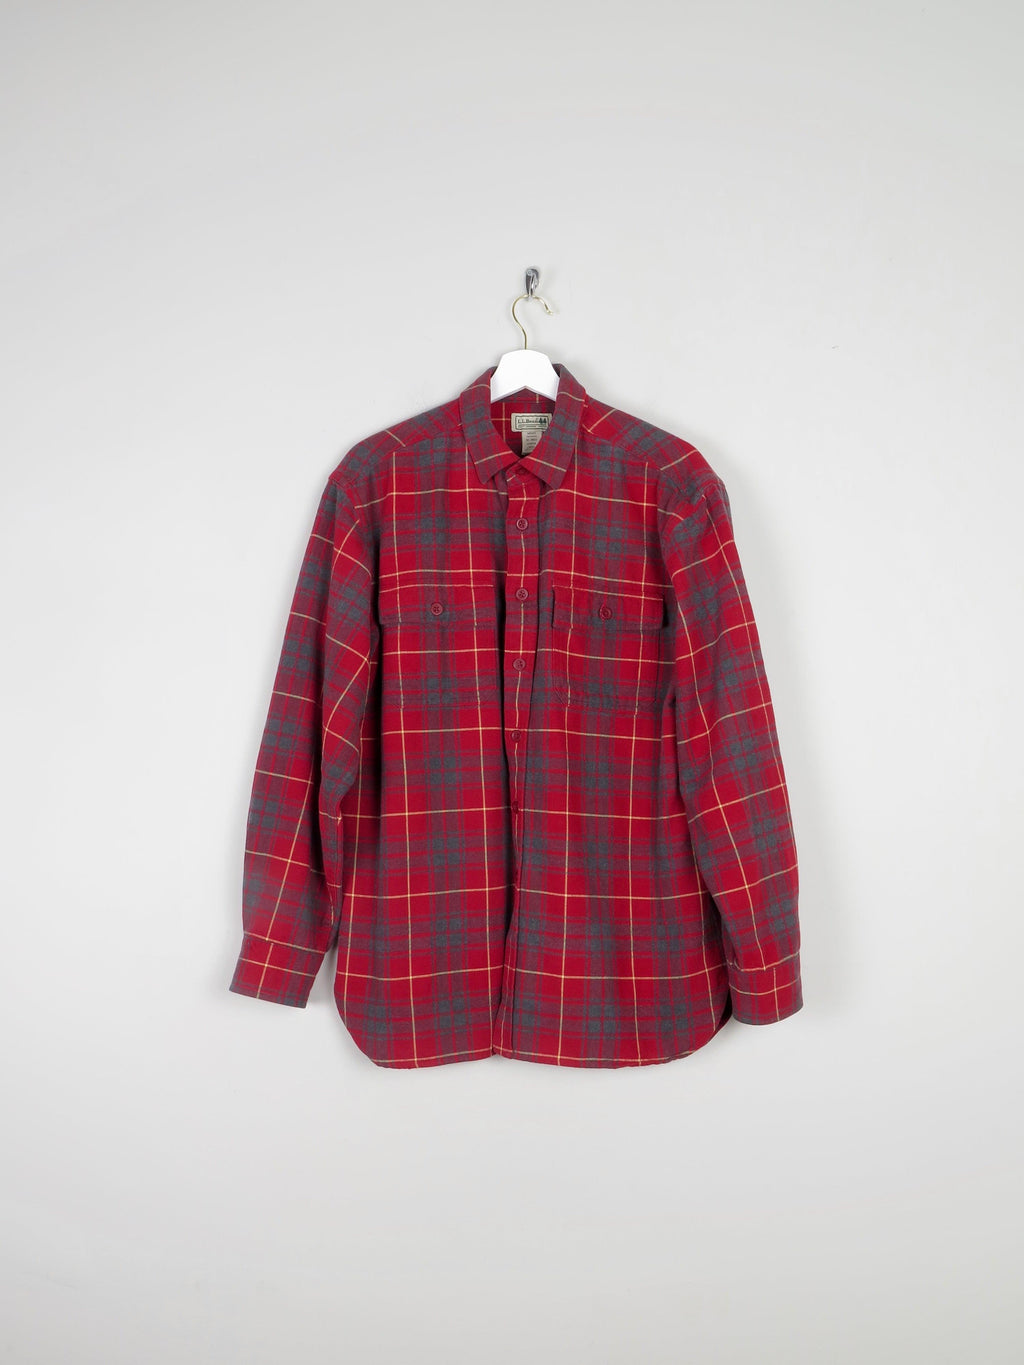 Men's Red Check Heavy Flannel LLBean Shirt M - The Harlequin